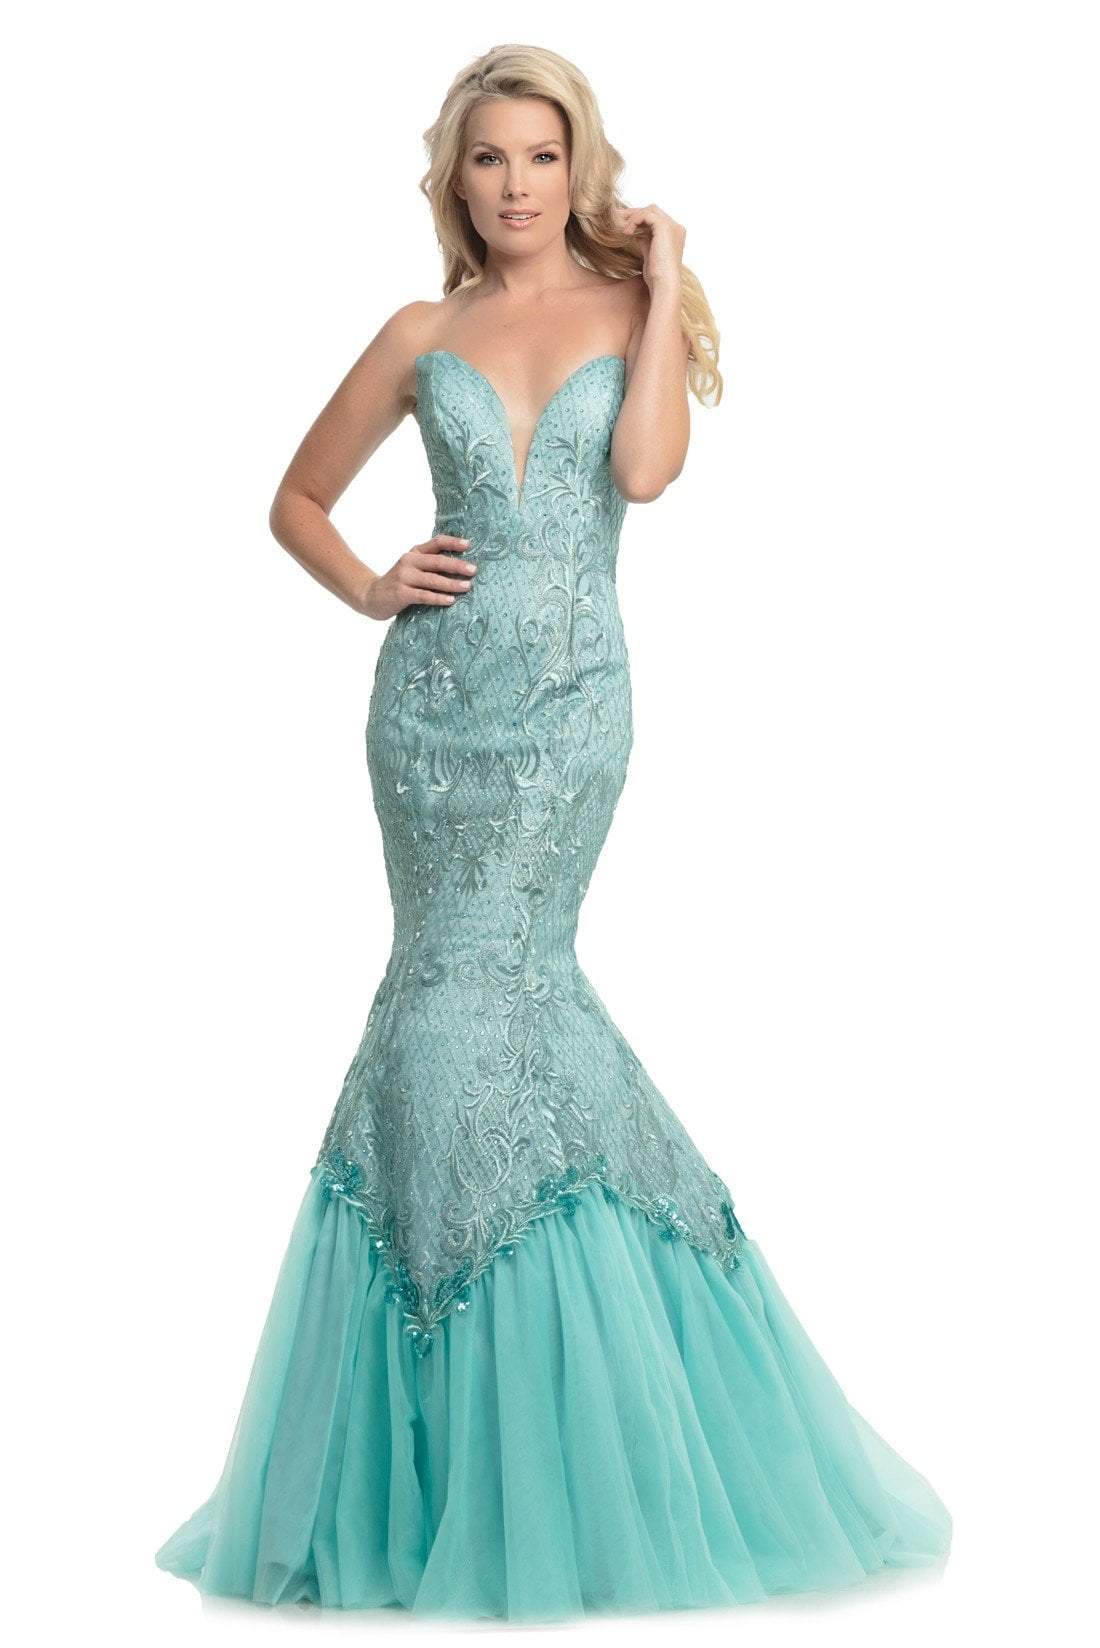 Johnathan Kayne - 9001 Dramatically Embellished Strapless Mermaid Gown Special Occasion Dress 0 / Aqua